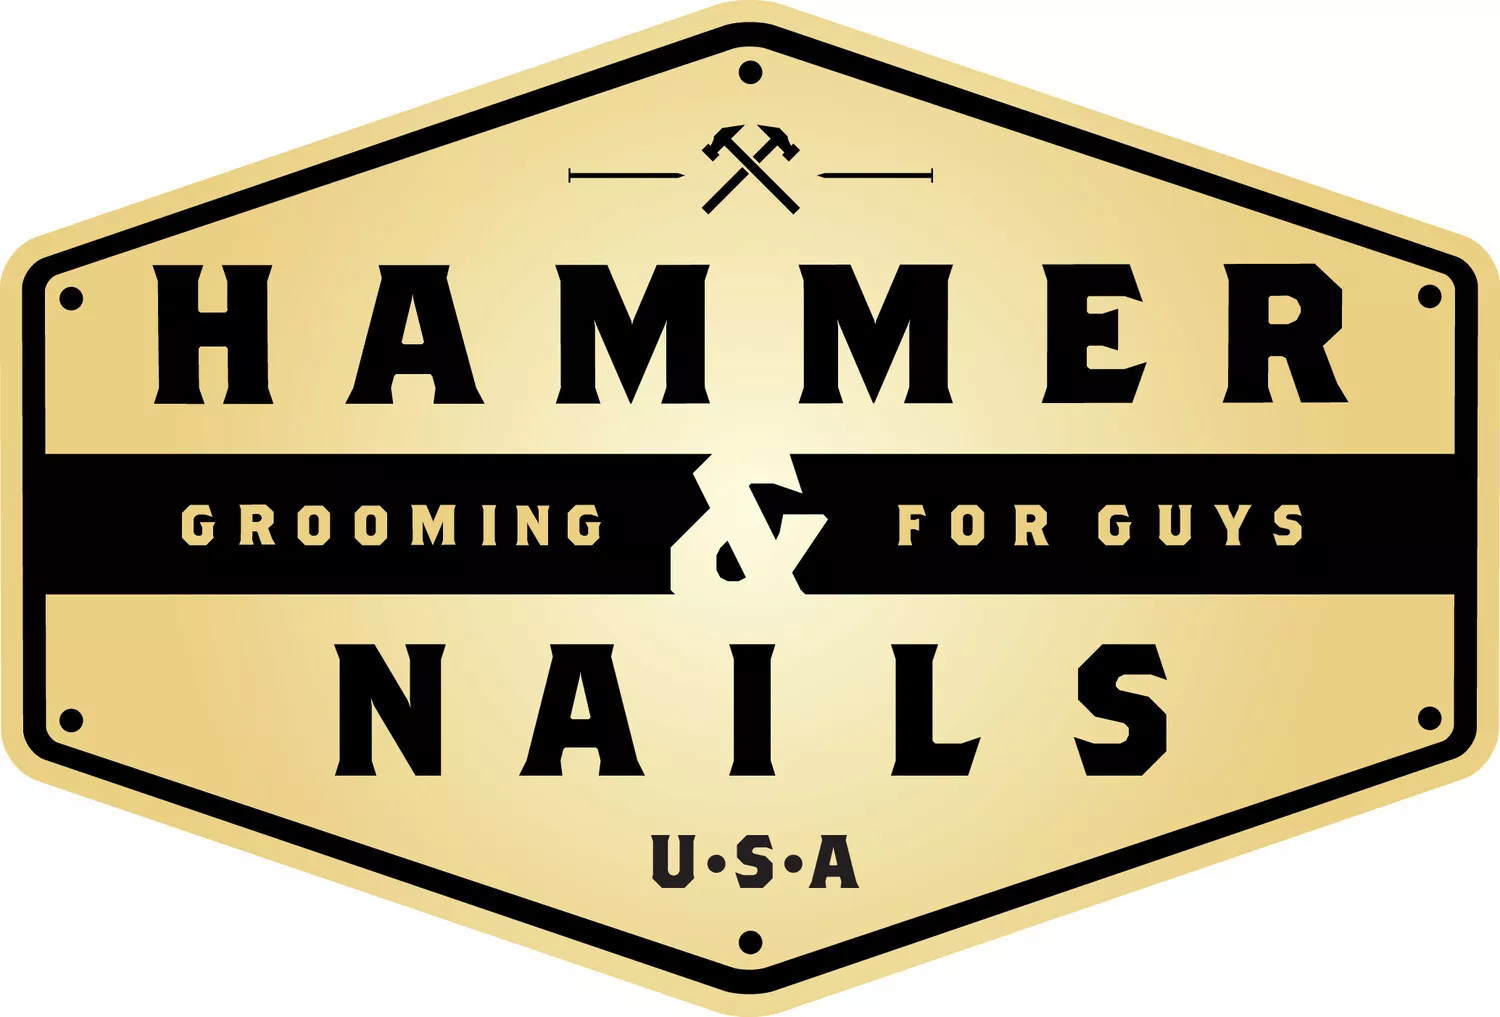 Hammer and Nails Grooming For Guys Logo